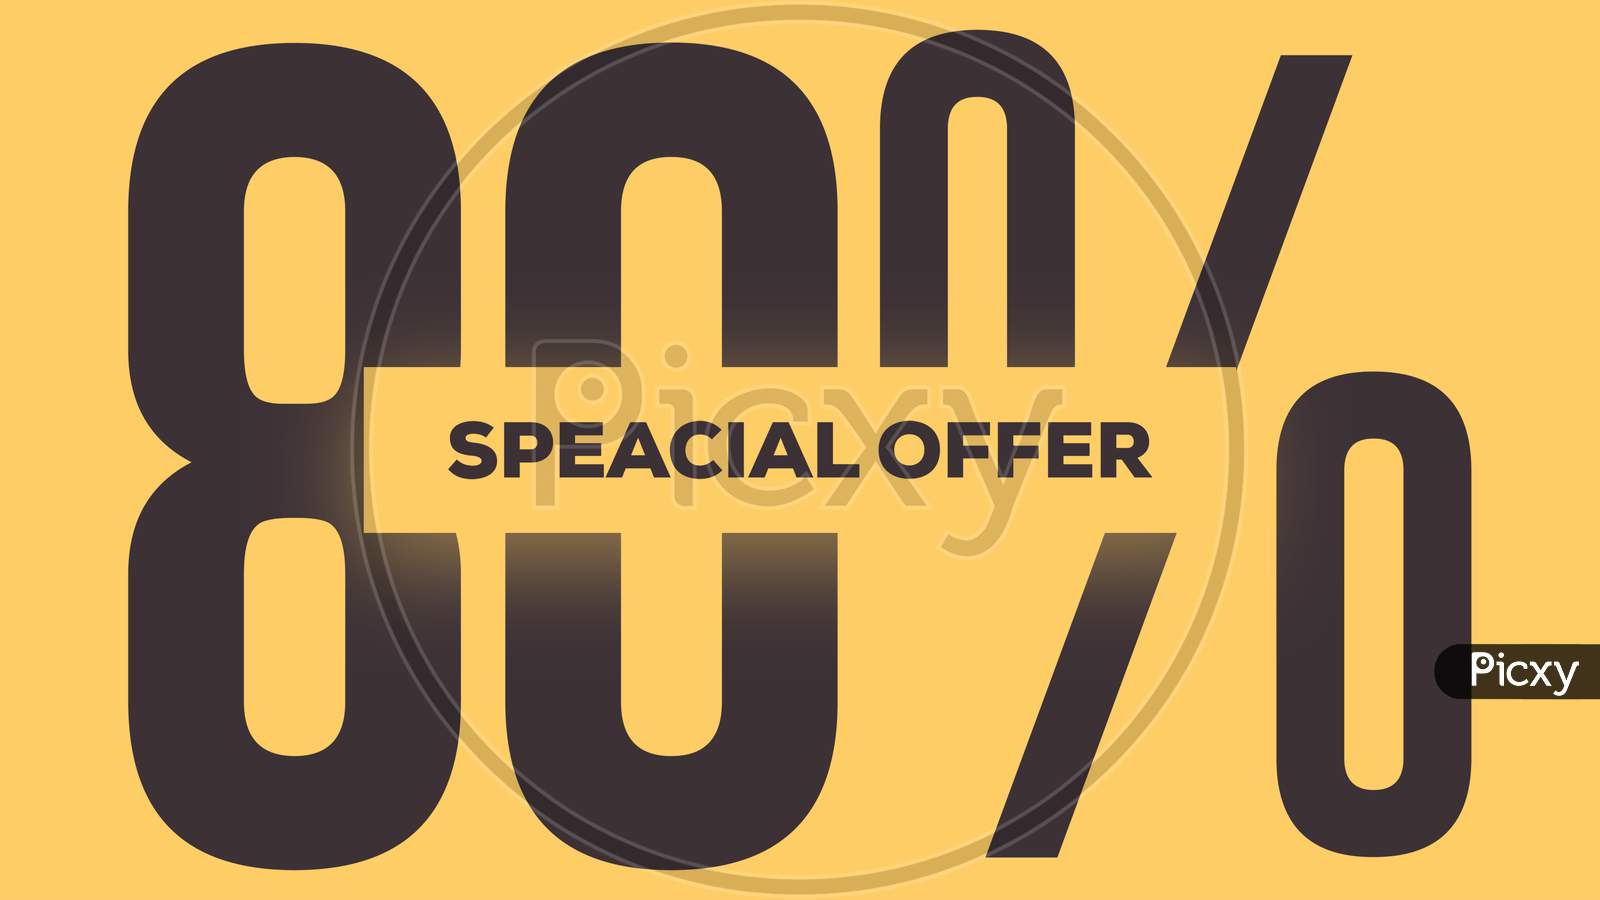 Speacial Offer 80% Off Illustration Use For Landing Page,Website, Poster, Banner, Flyer, Background,Label, Wallpaper,Sale Promotion,Advertising, Marketing On Yellow Background